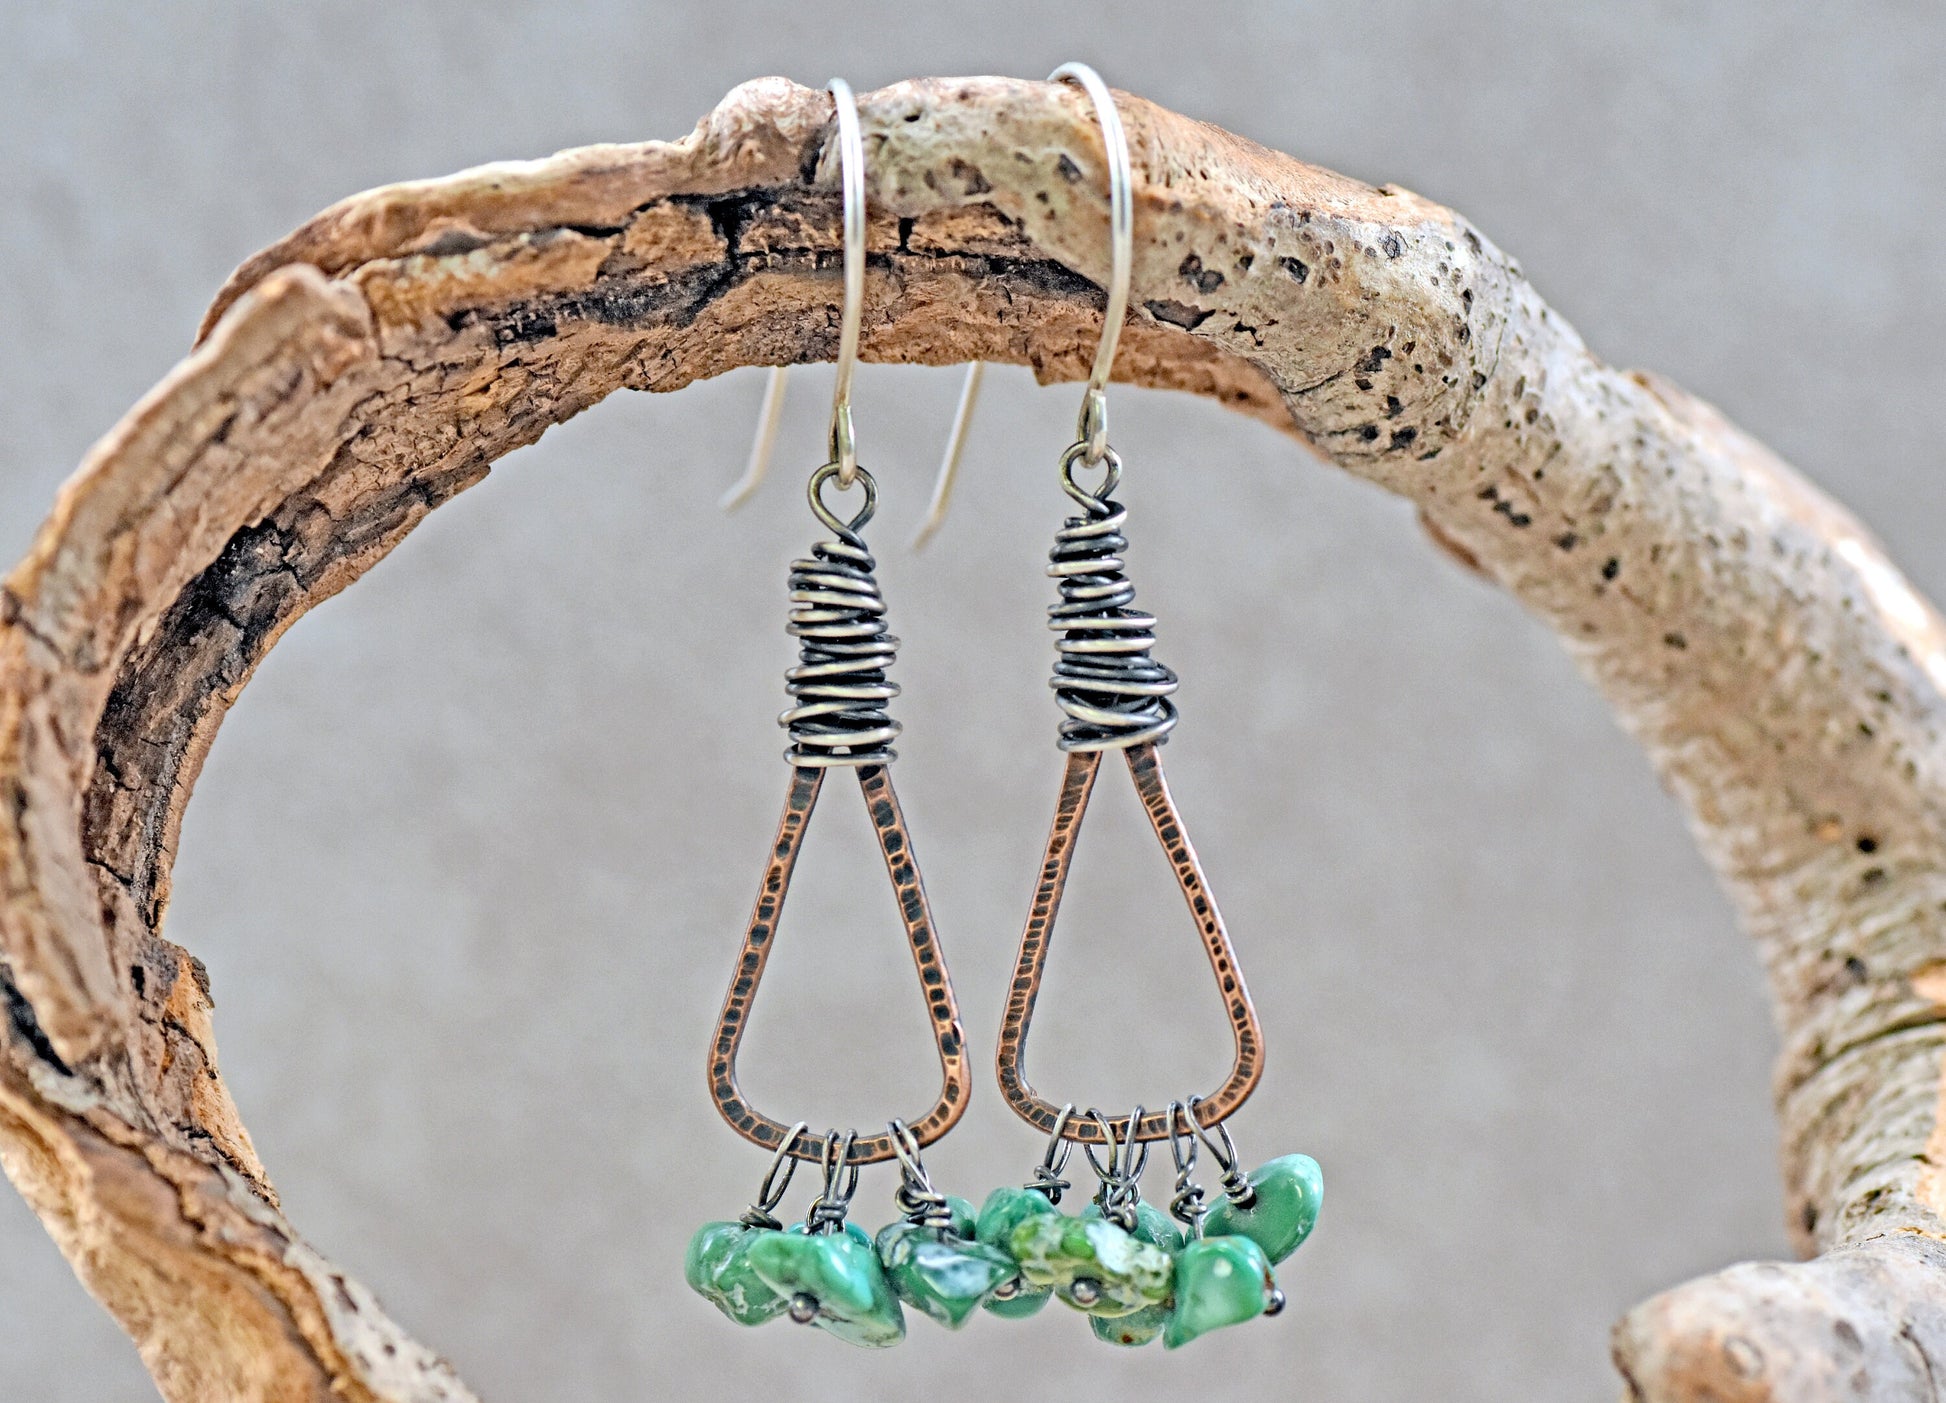 Green Turquoise Boho Triangle Earrings, Rustic Mixed Metal Jewelry Handmade, Unique Copper Sterling Silver Dangles